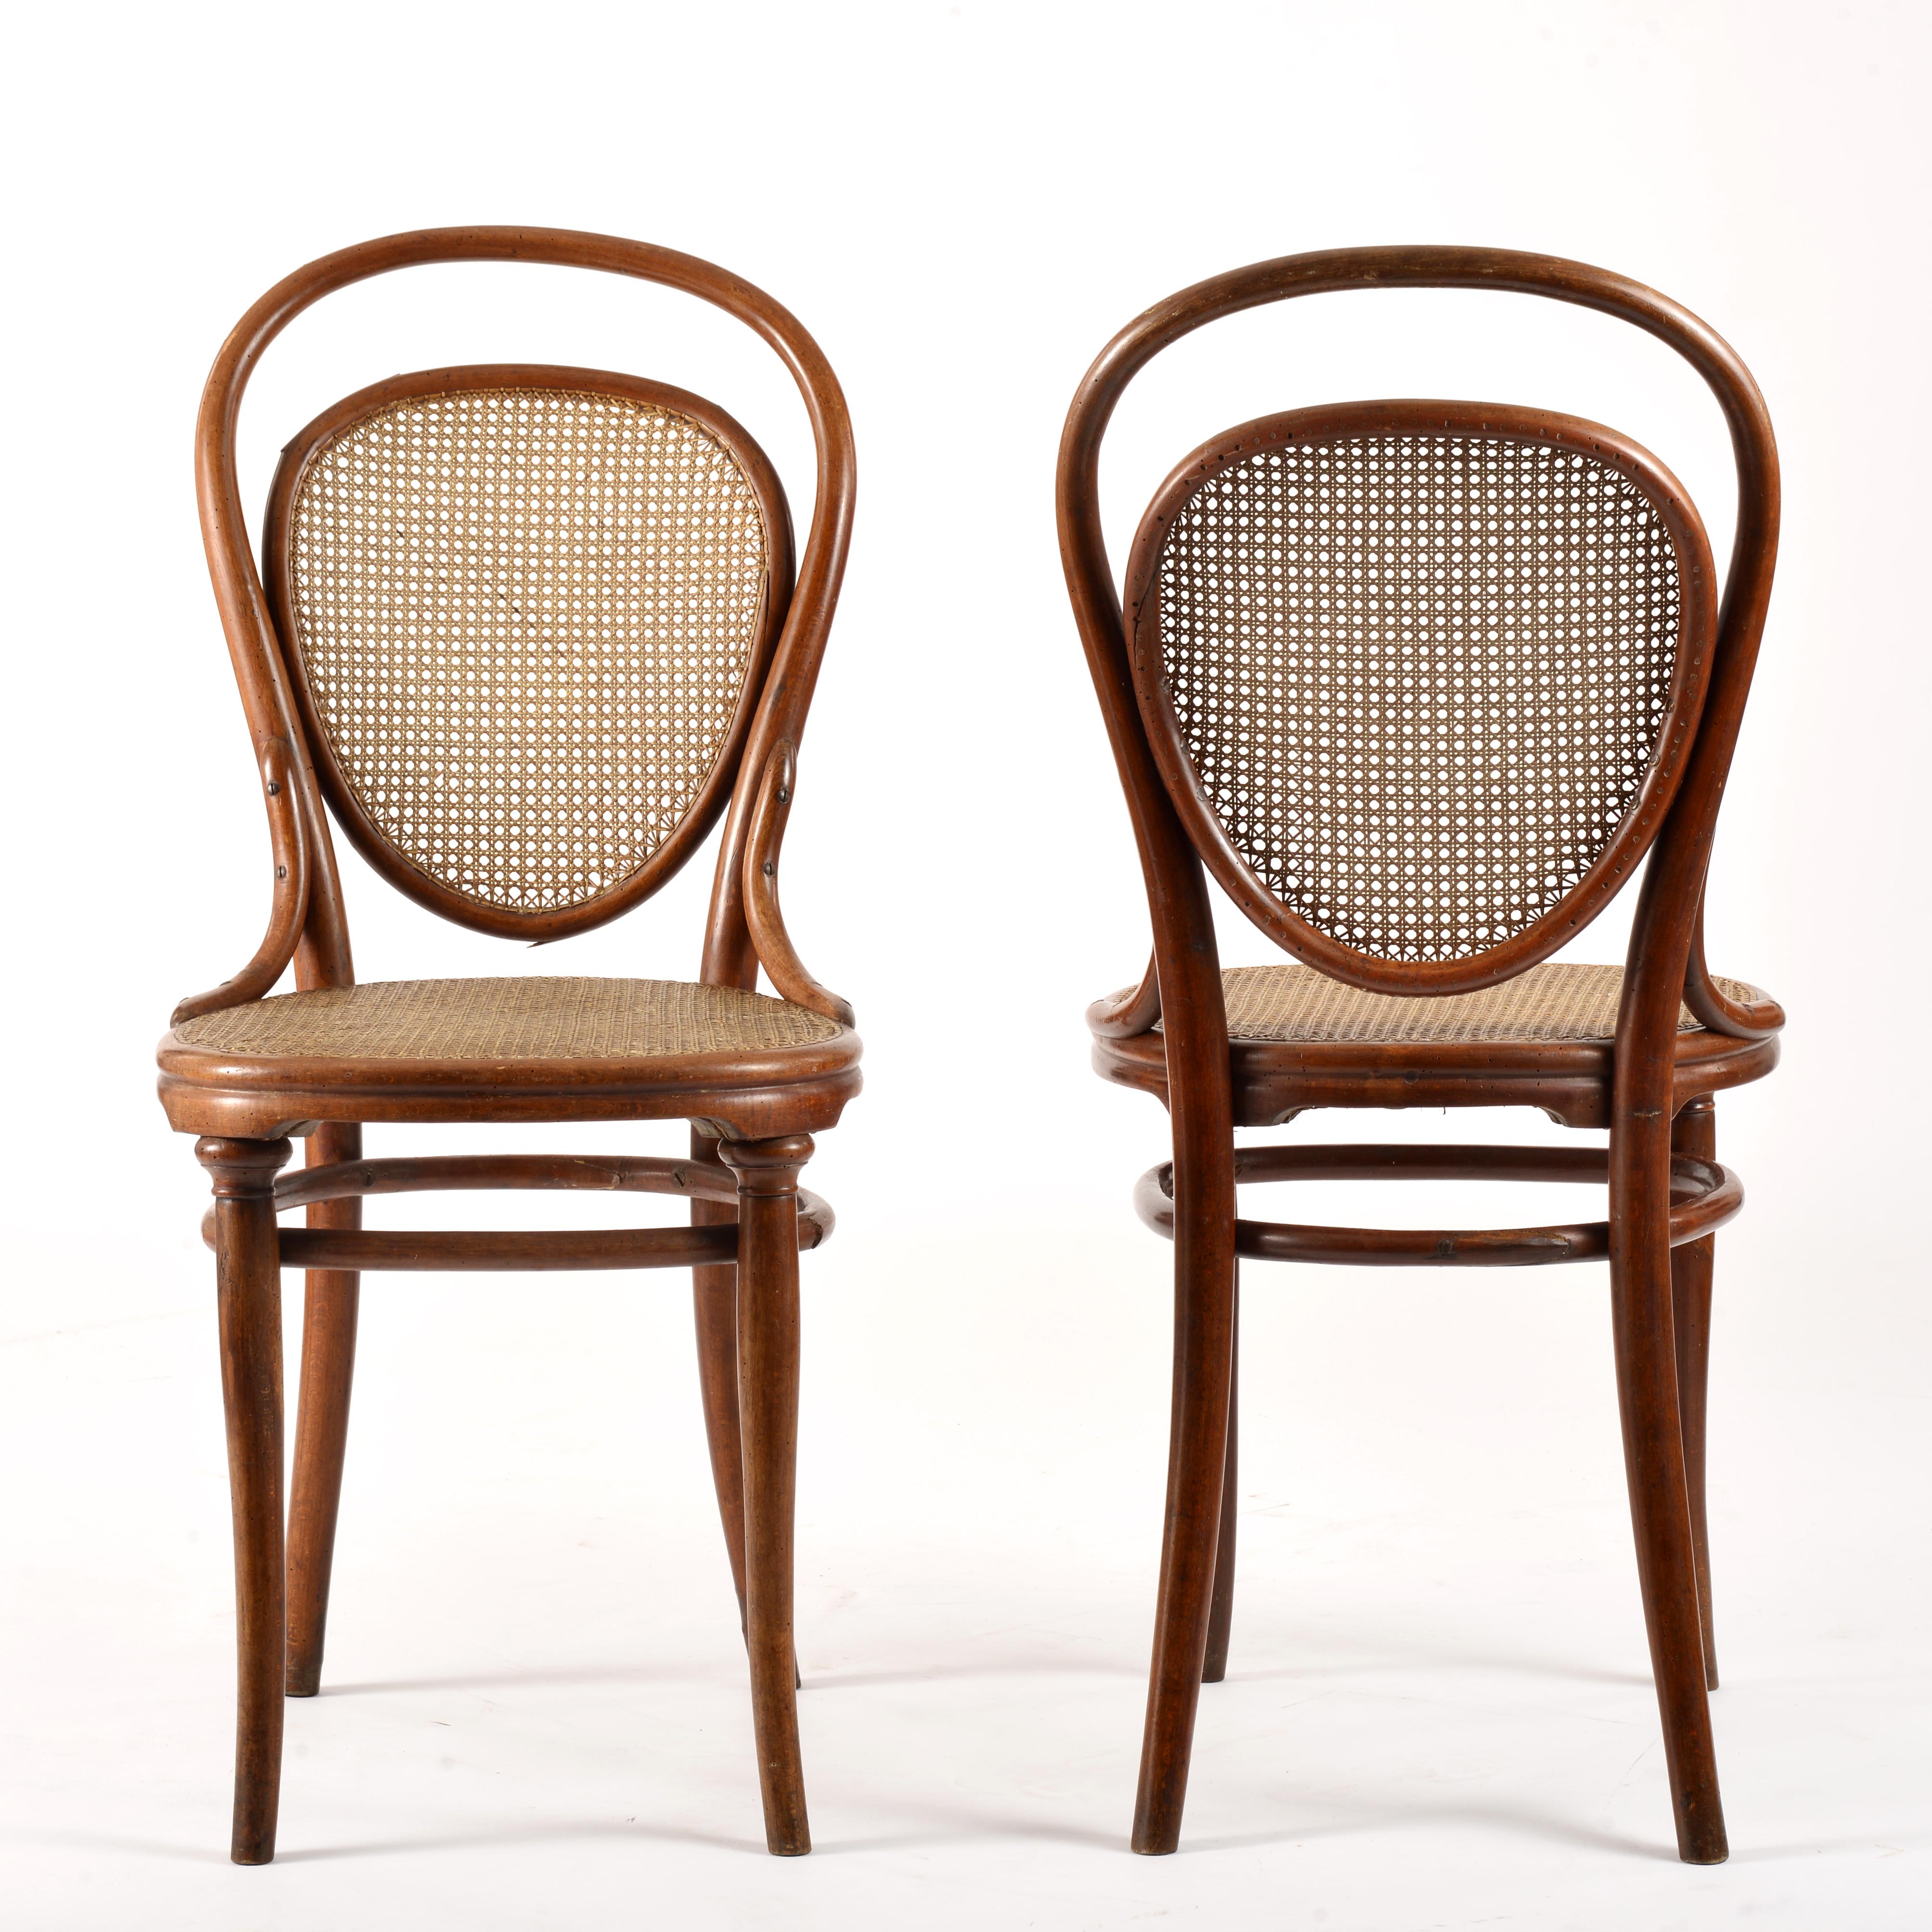 4 bentwood chairs, number 7, published by Thonet at the end of the 19th century. 2